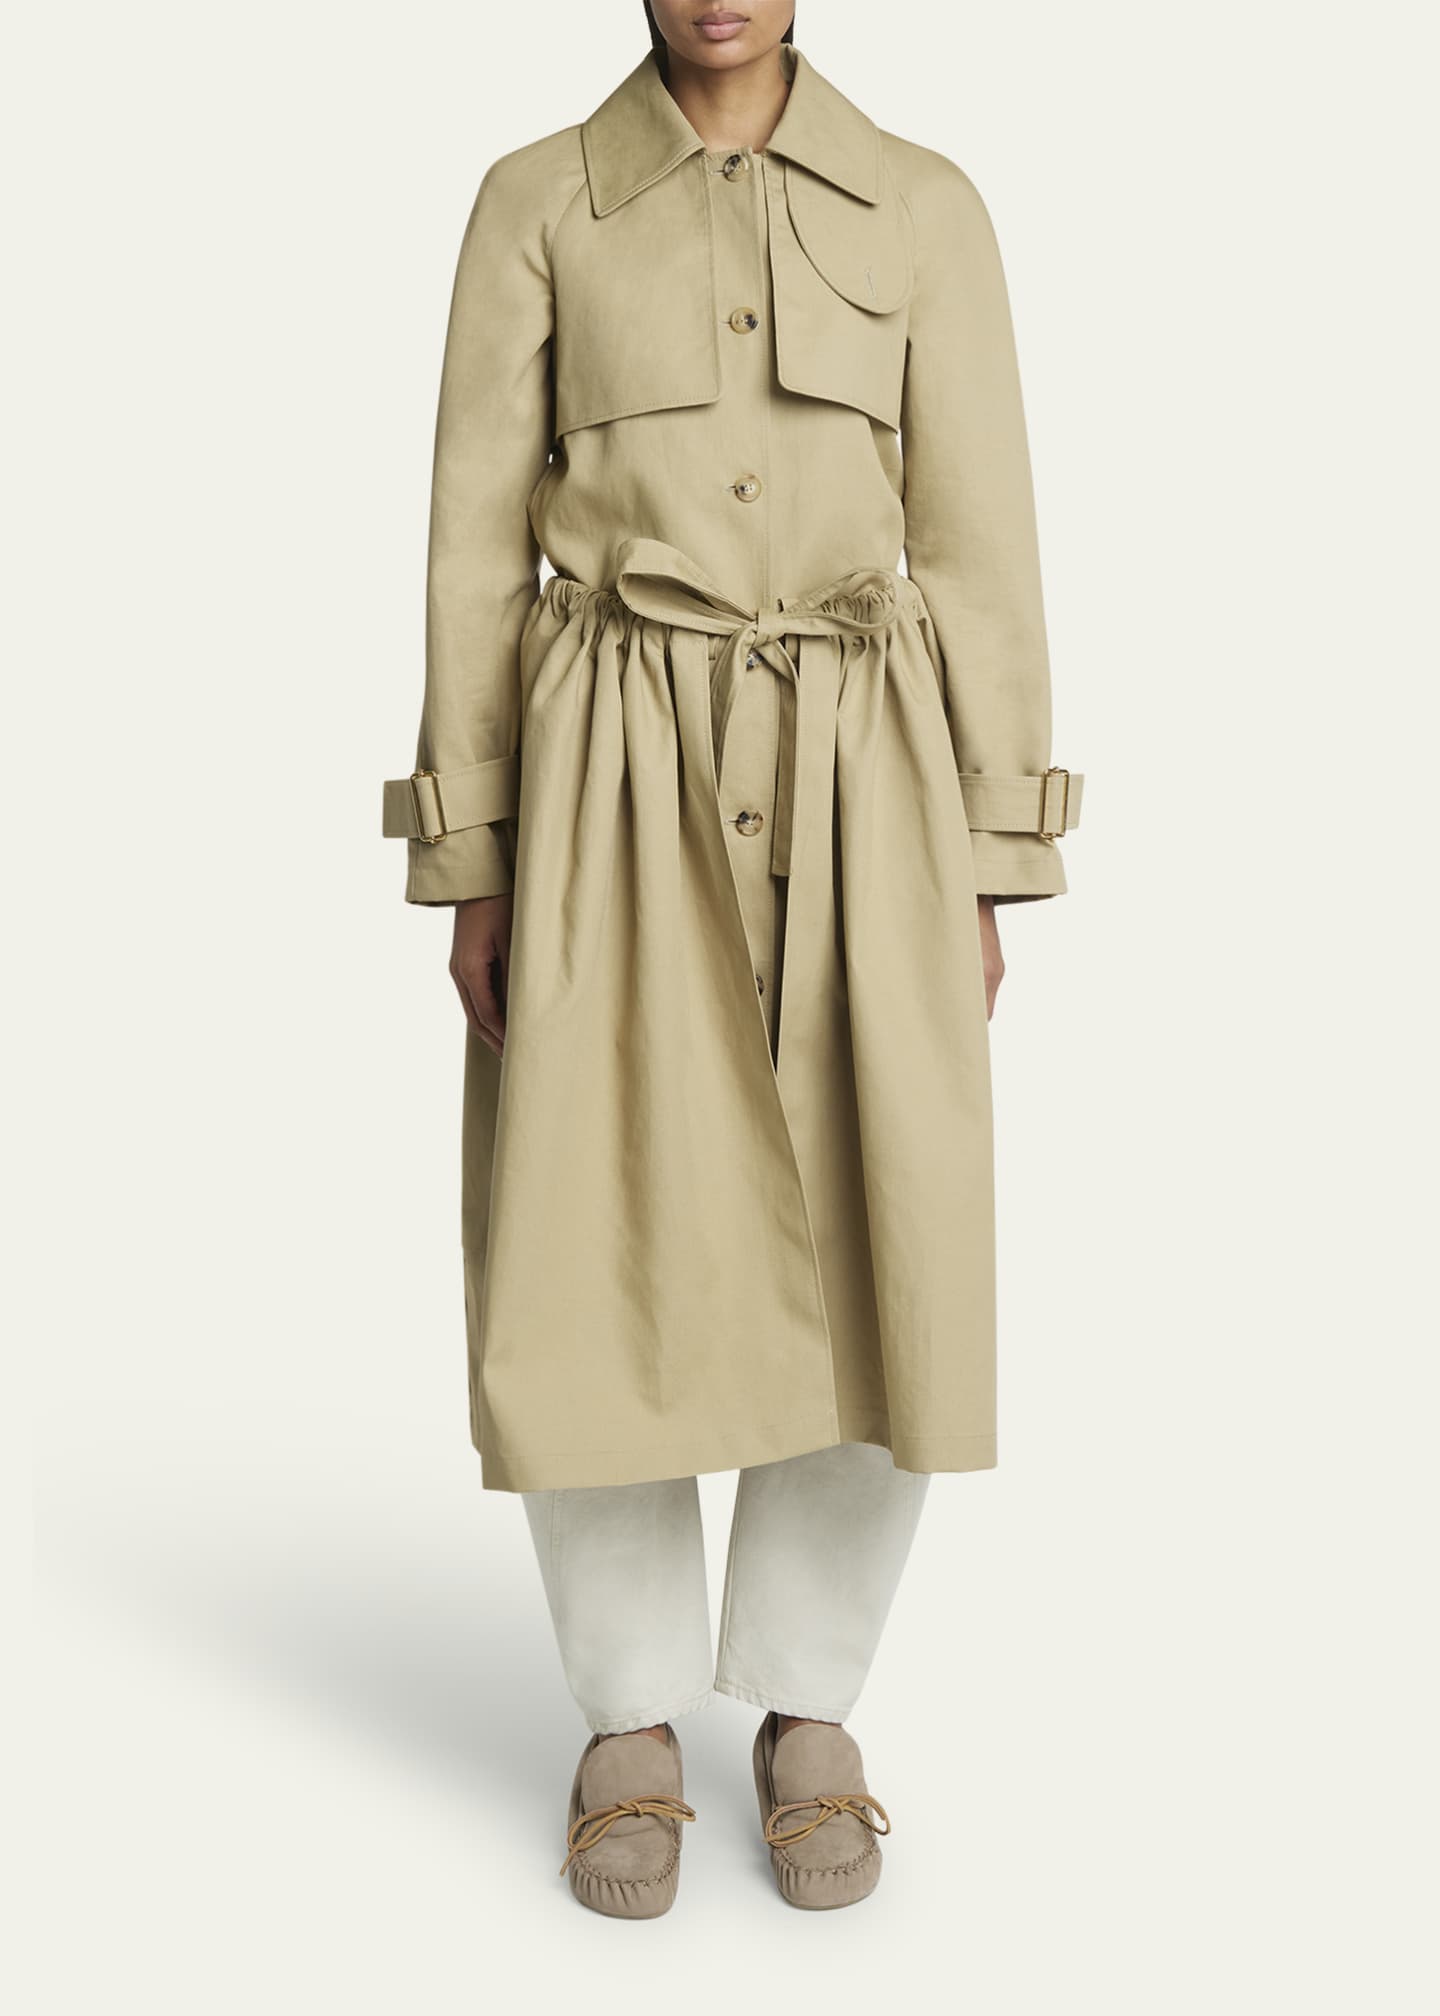 JW Anderson Gathered Waist Belted Trench Coat - Bergdorf Goodman